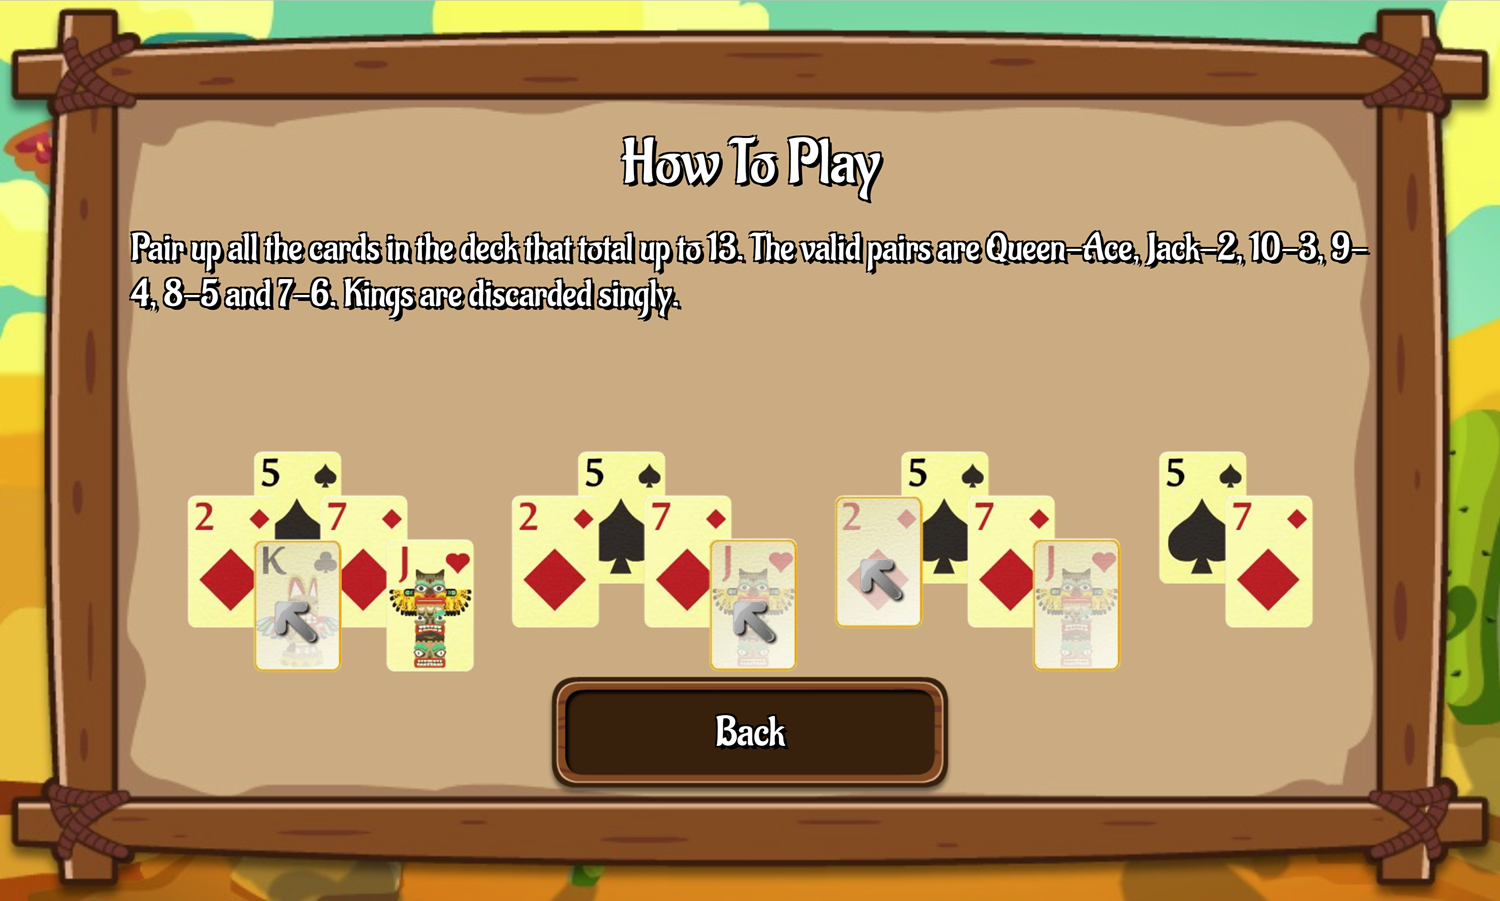 Totem Solitaire Game How to Play Screen Screenshot.